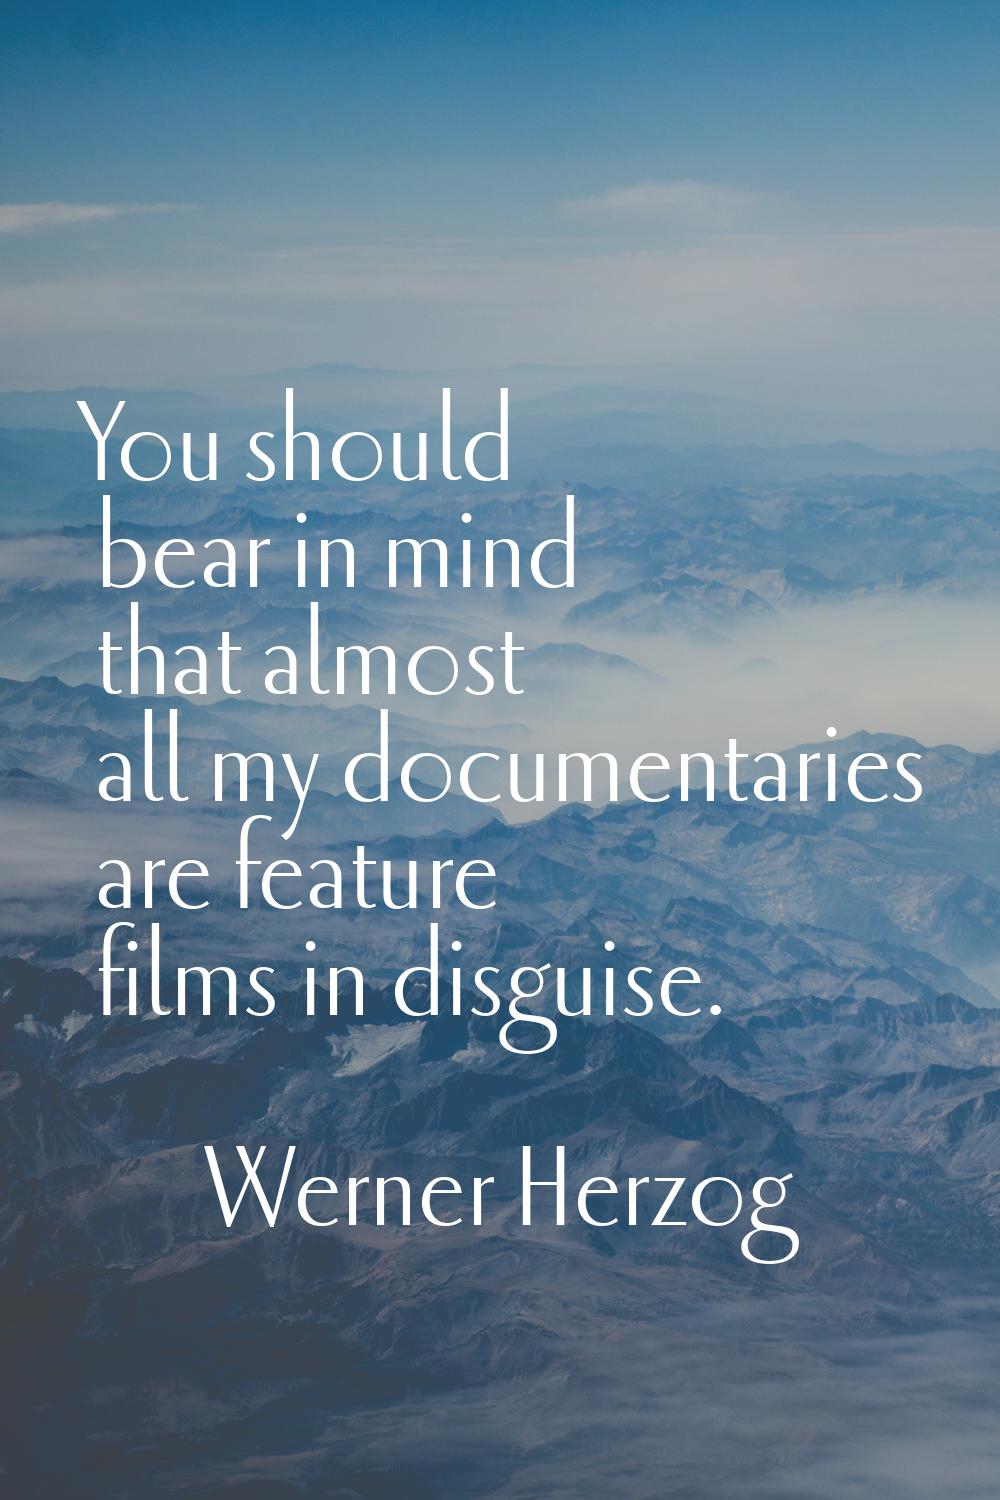 You should bear in mind that almost all my documentaries are feature films in disguise.